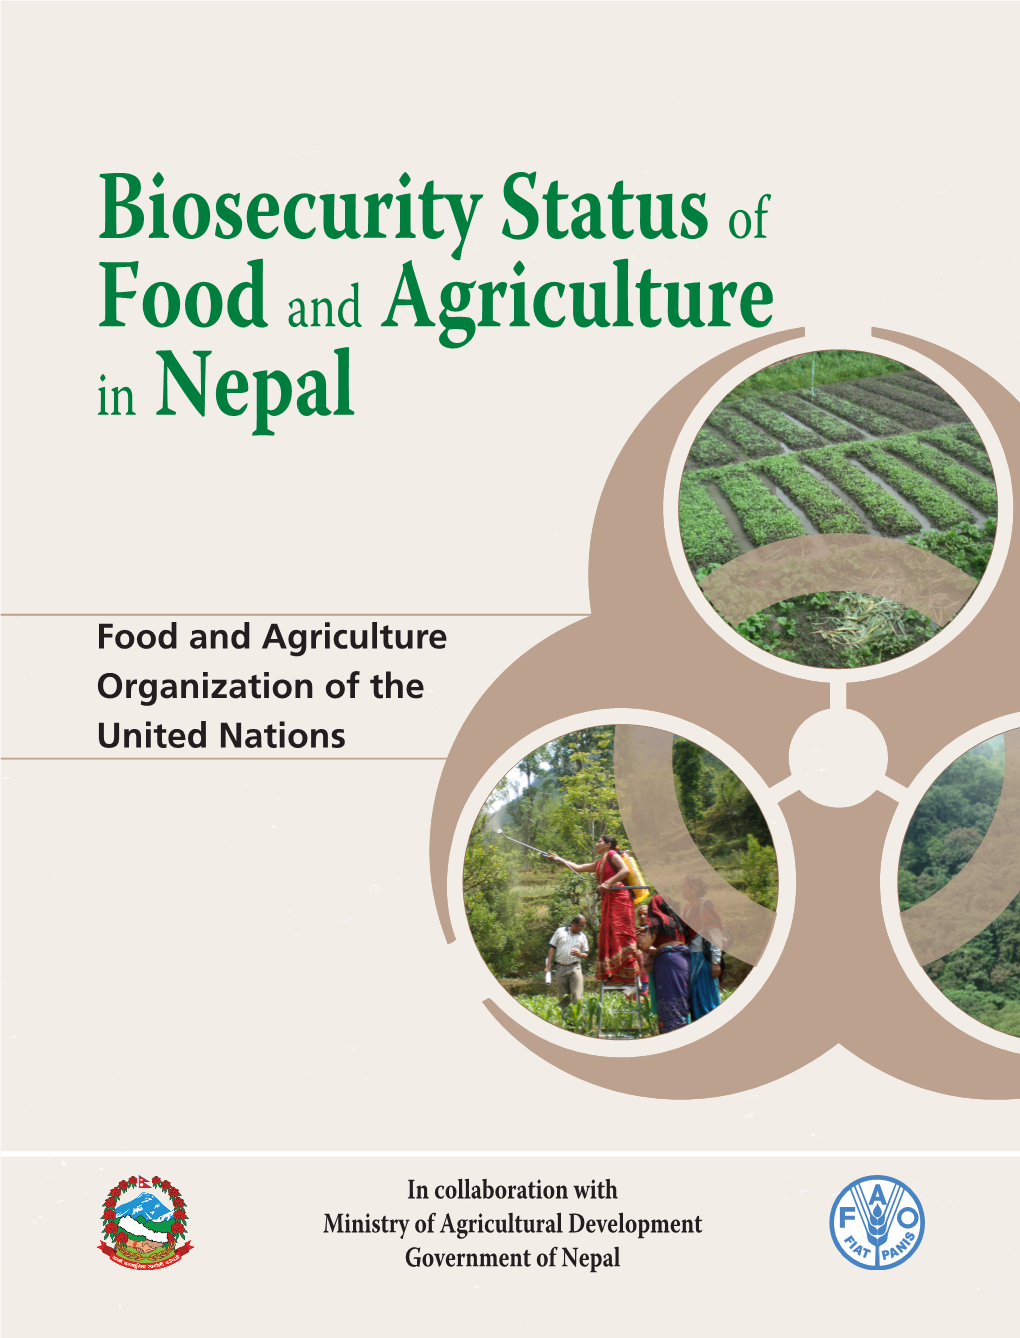 Biosecurity Status of Food and Agriculture in Nepal